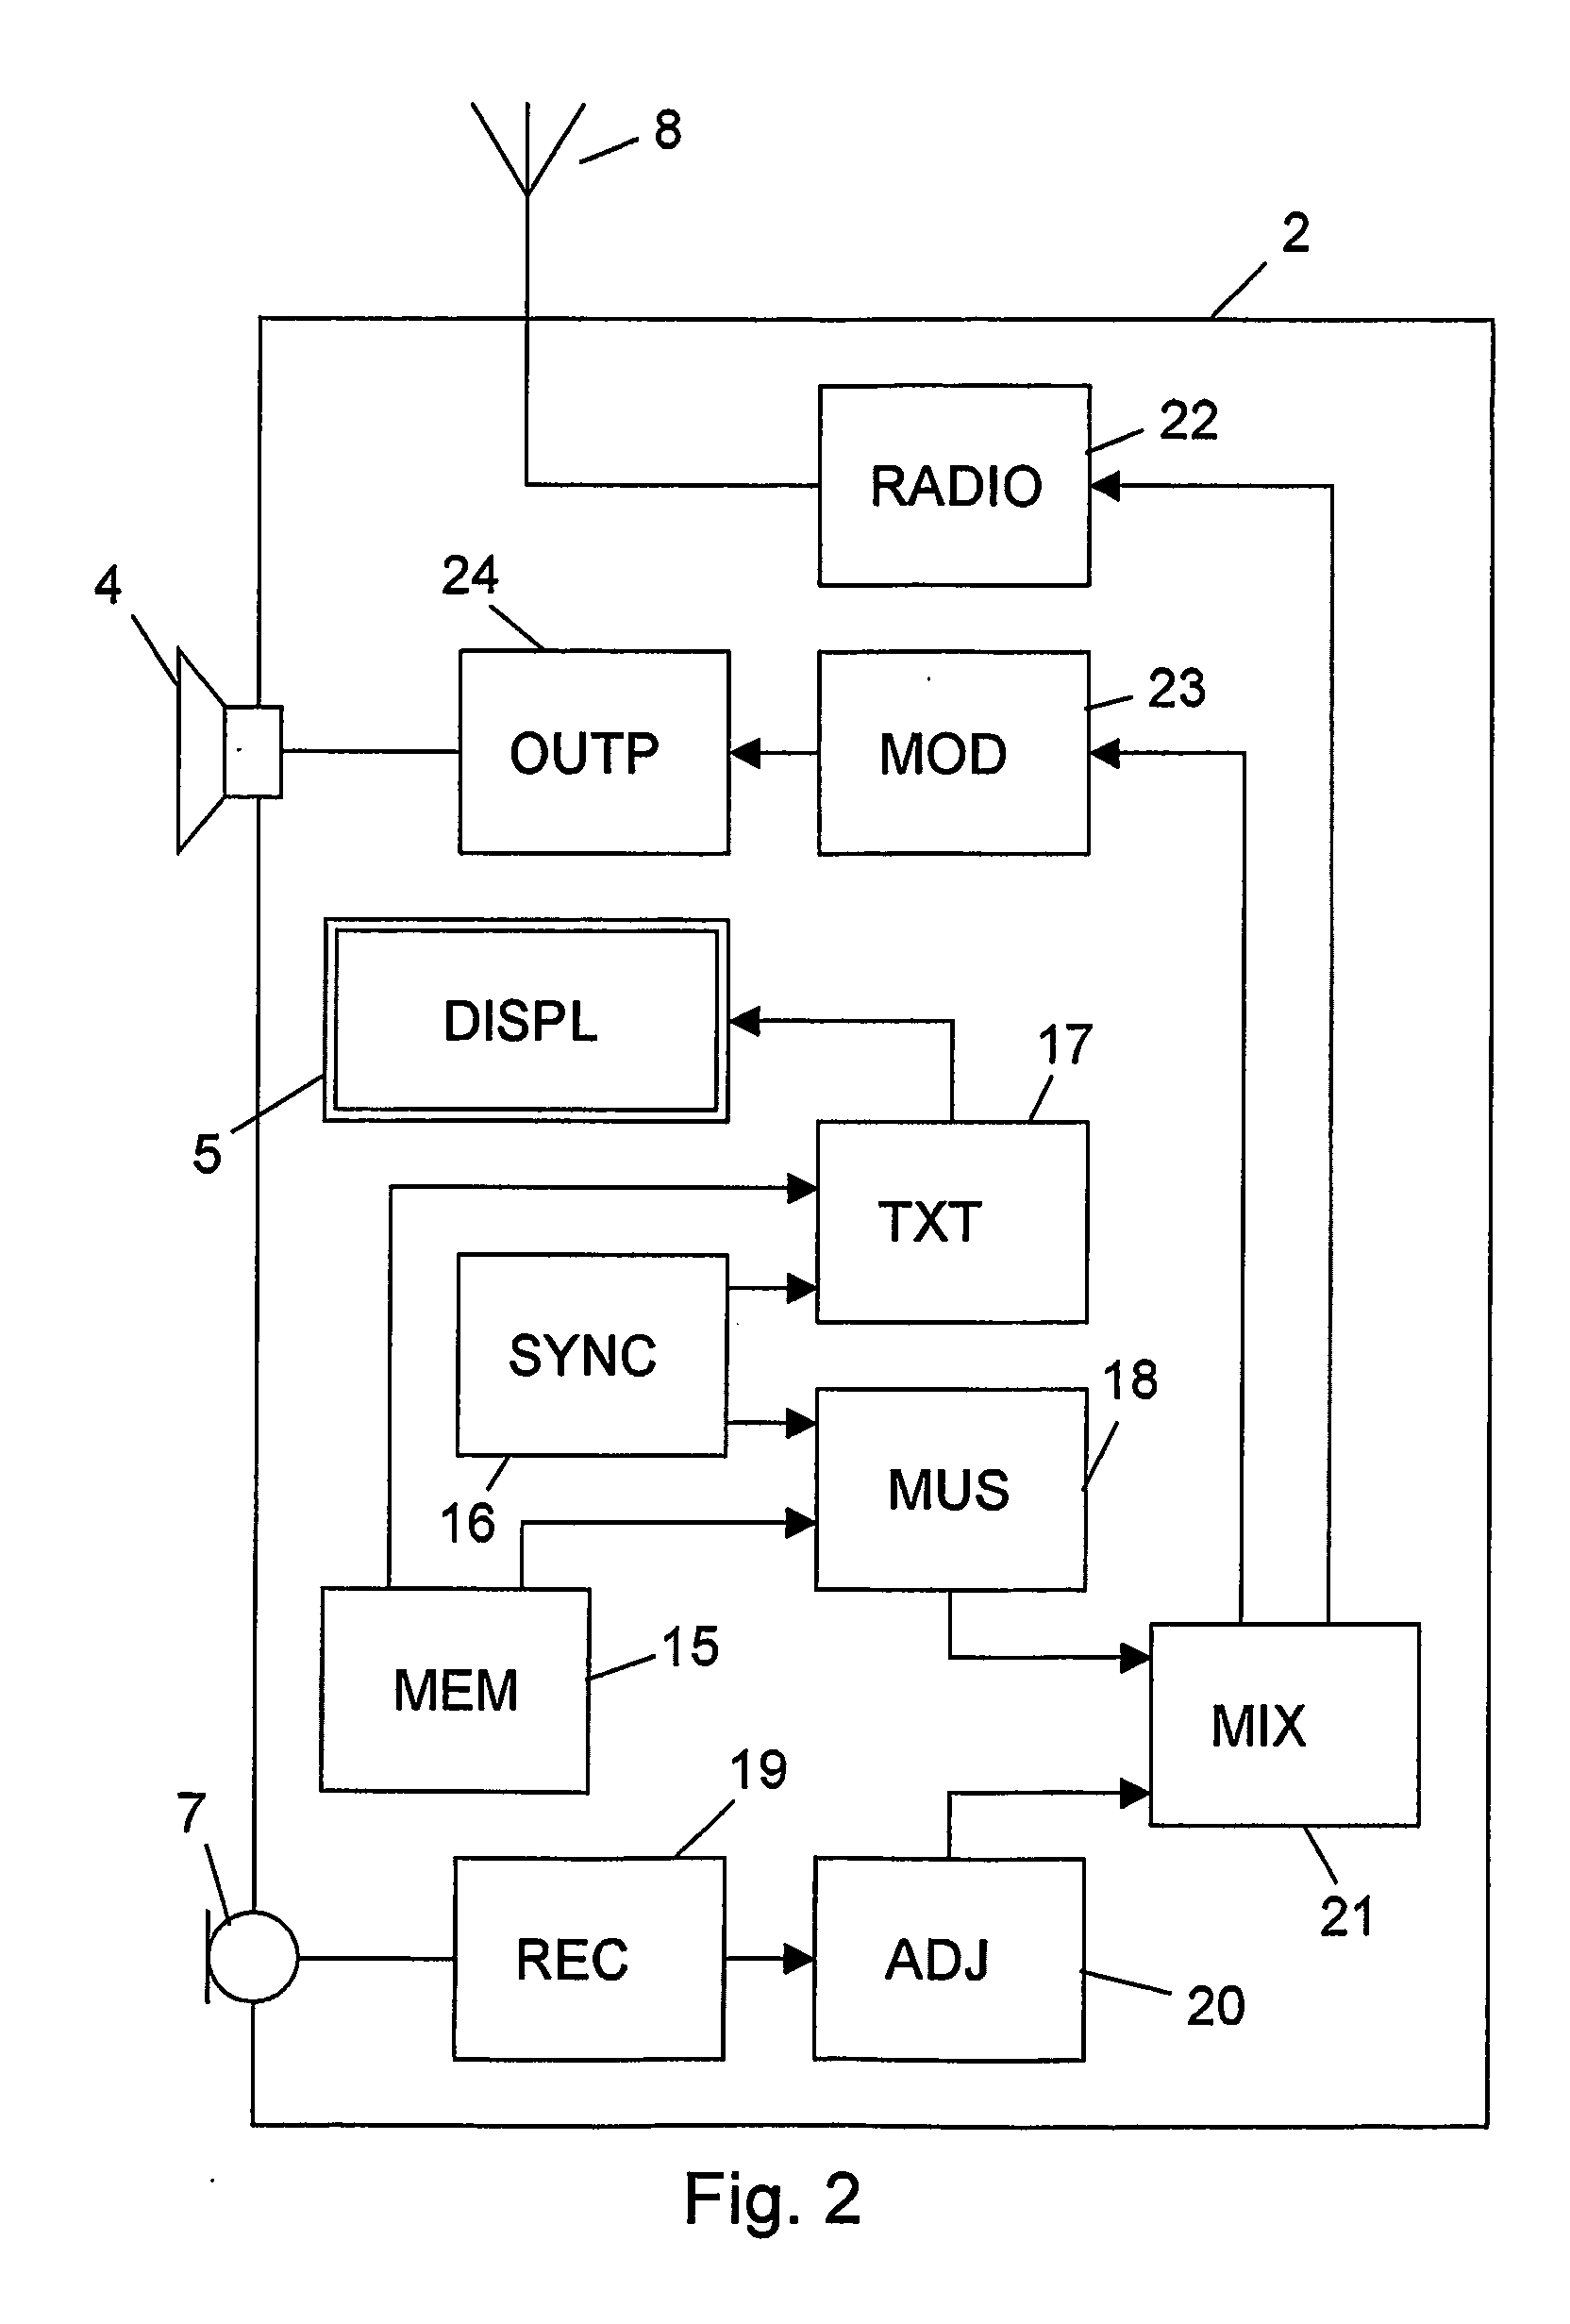 Electronic communications device with a karaoke function